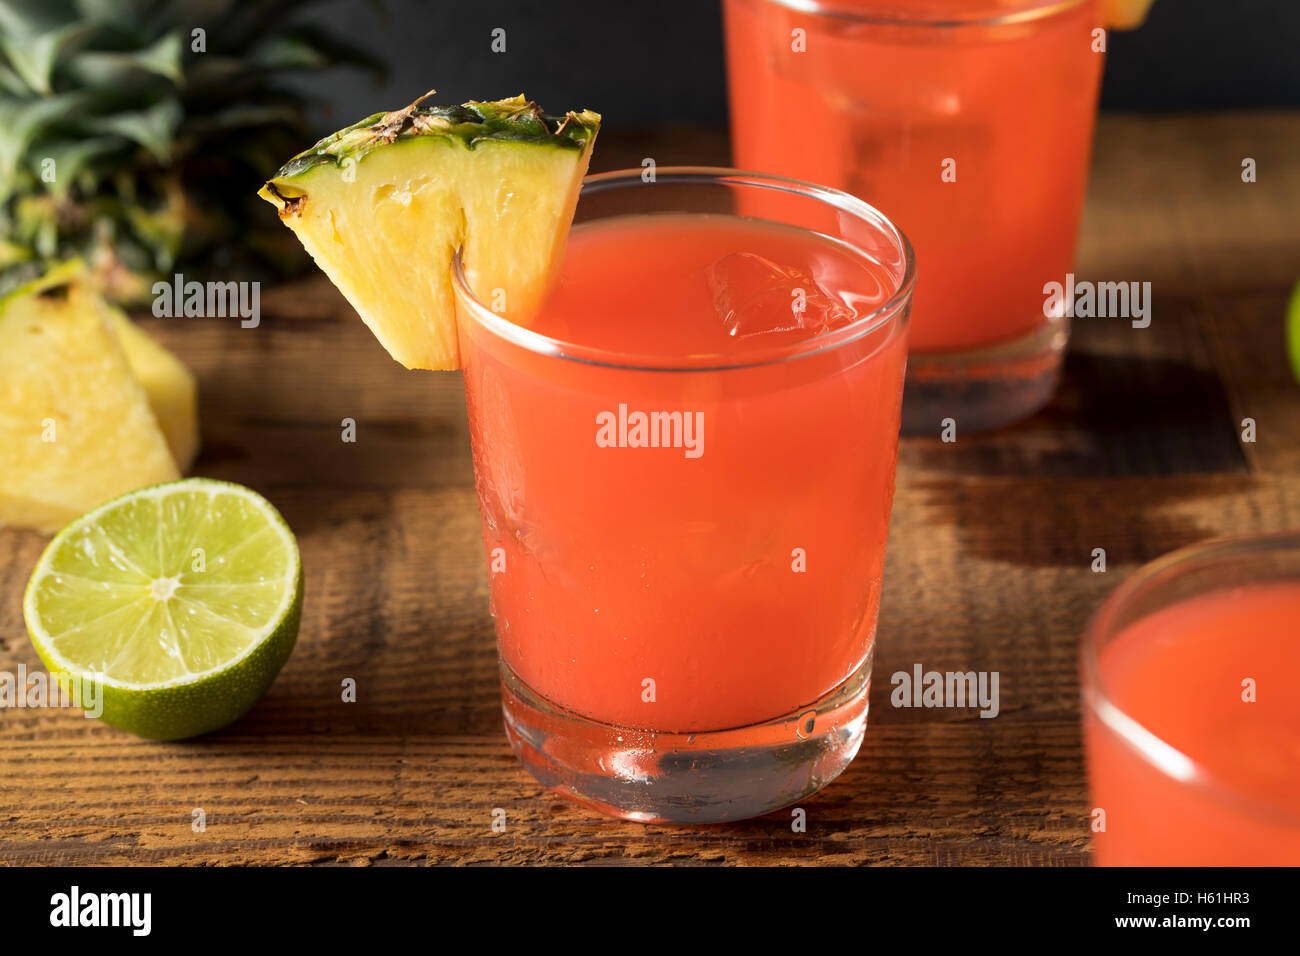 Homemade Jamaican Rum Punch with Lime and Pineapple Stock Photo